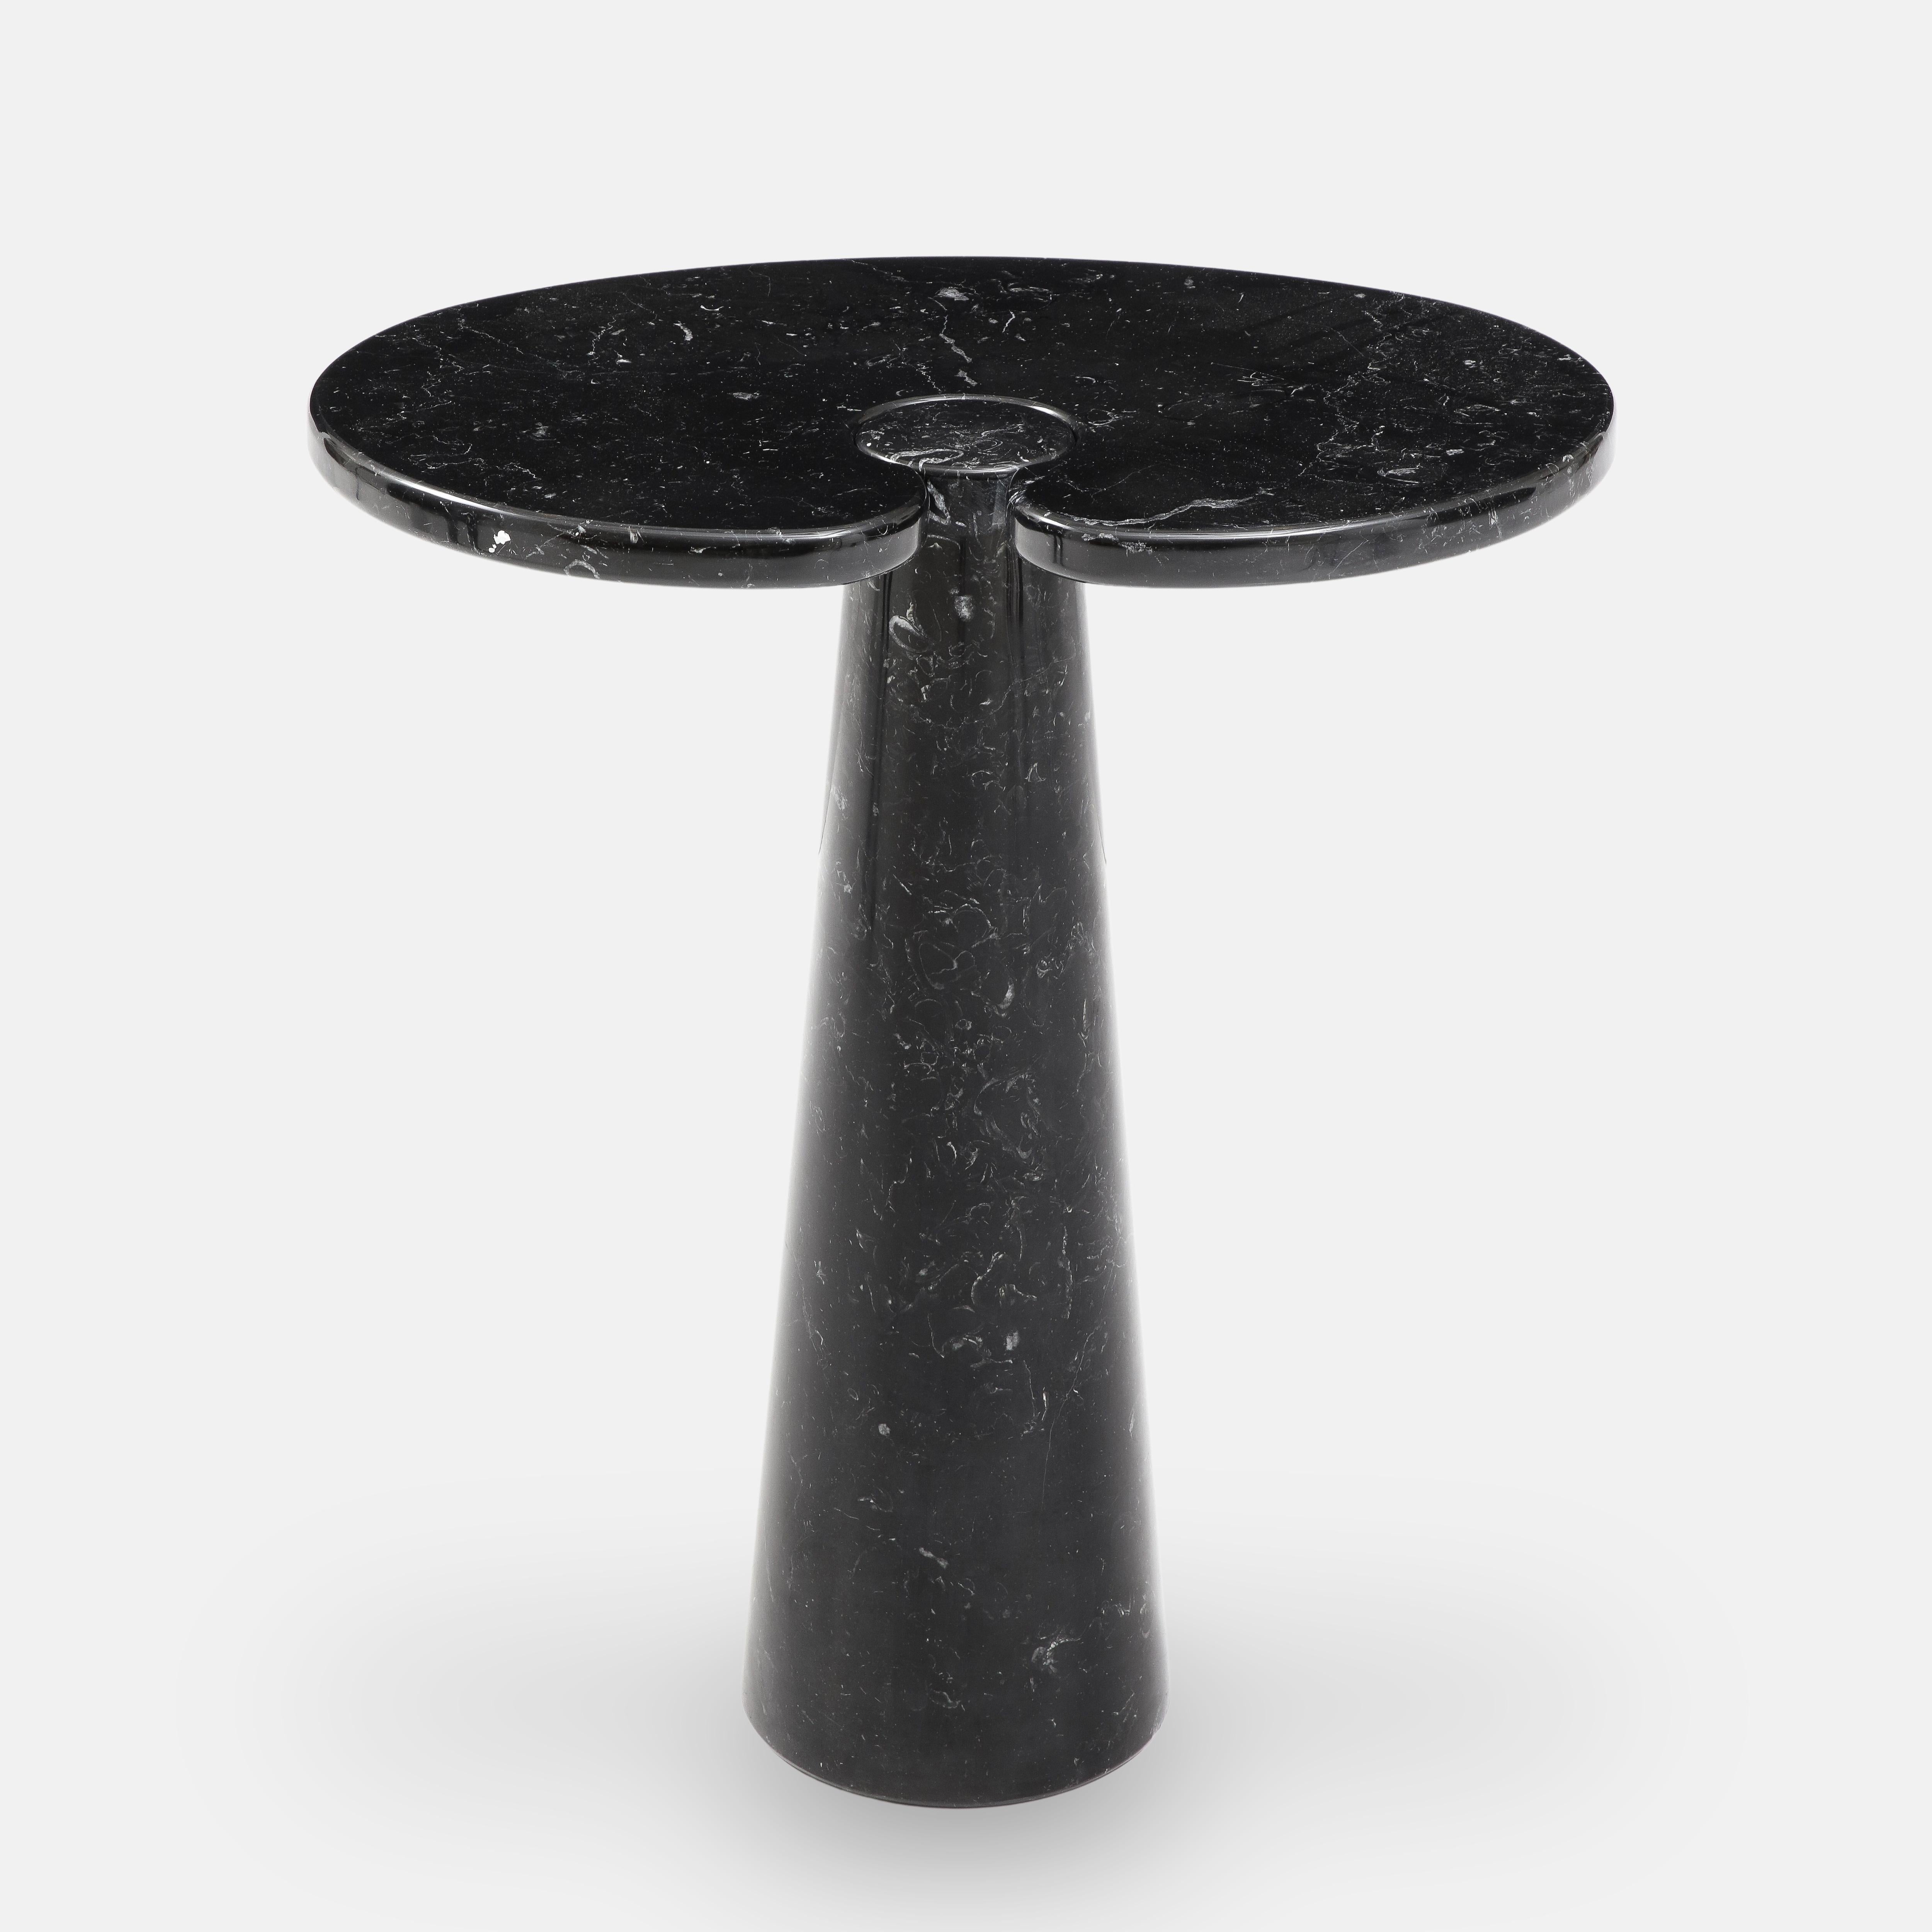 Designed by Angelo Mangiarotti for Skipper from the 'Eros' series, pair of Nero Marquina marble tall side tables or console tables with top fitted on a conical base. These elegantly organic tables have beautiful subtle veining throughout. Original